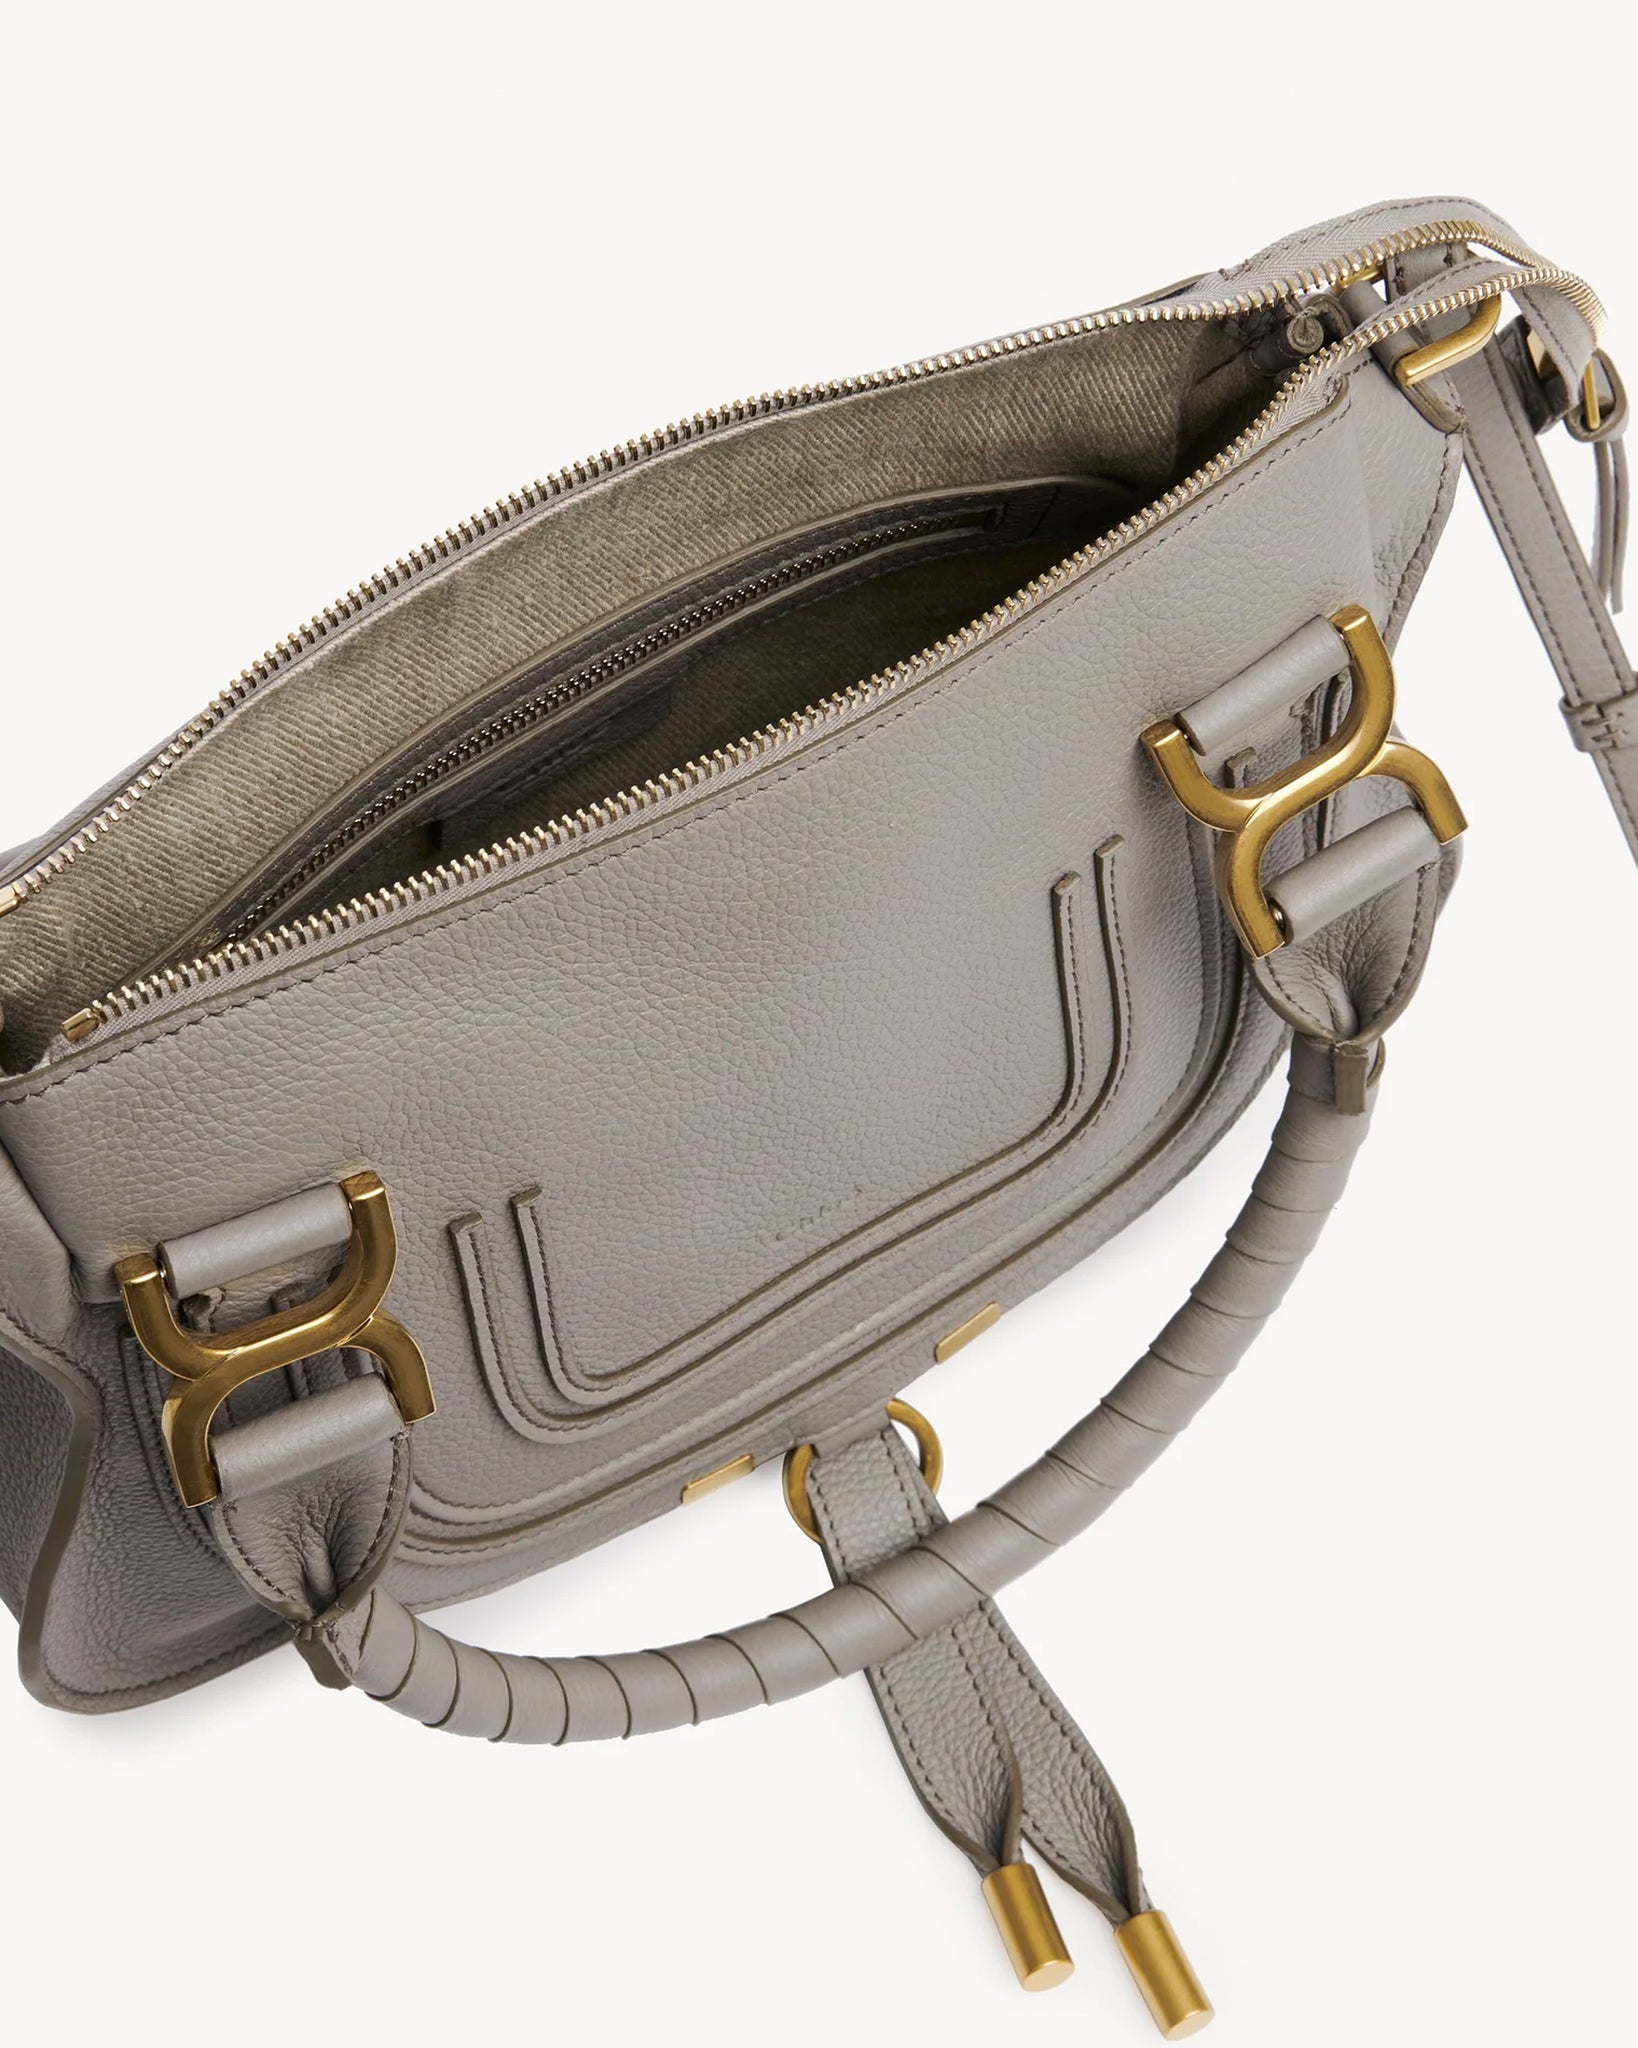 Marcie Small Double Carry Satchel in Cashmere Grey